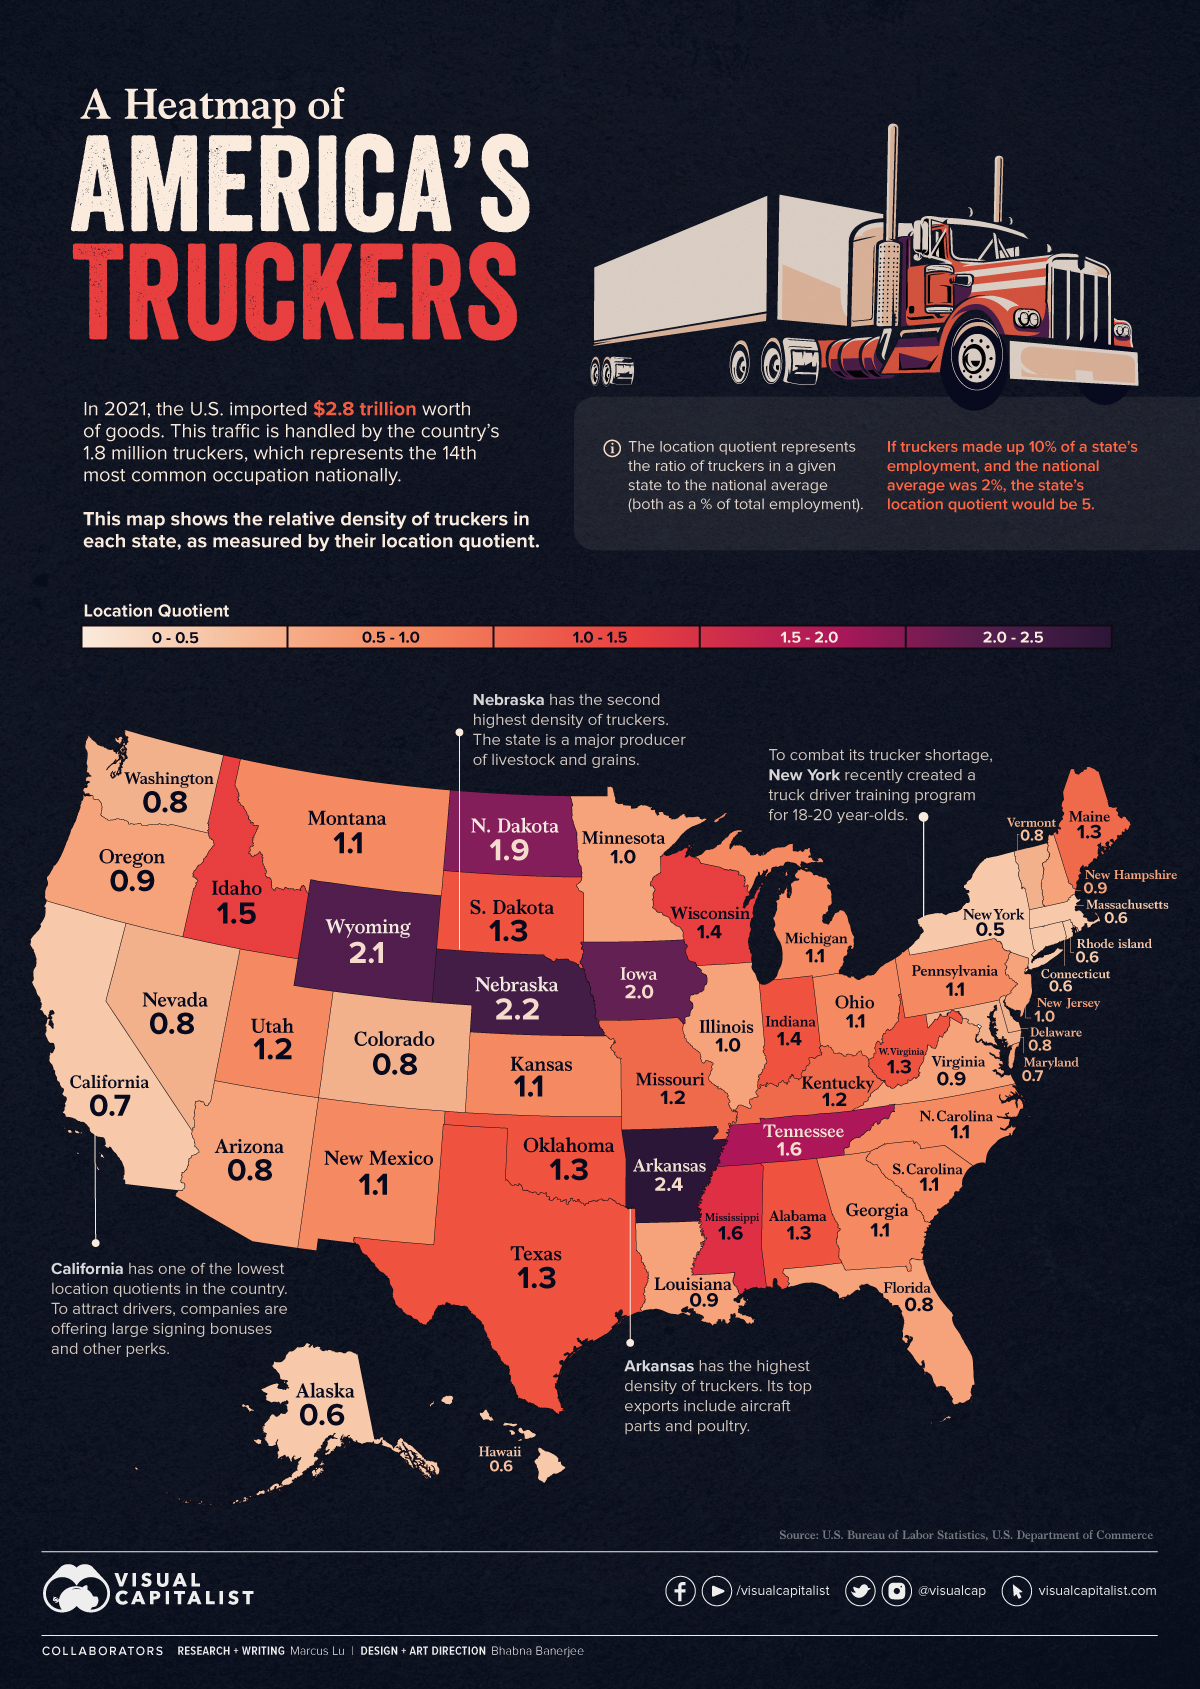 How Much Do Truck Drivers Make? 2020 U.S. Truck Driver Salary Study